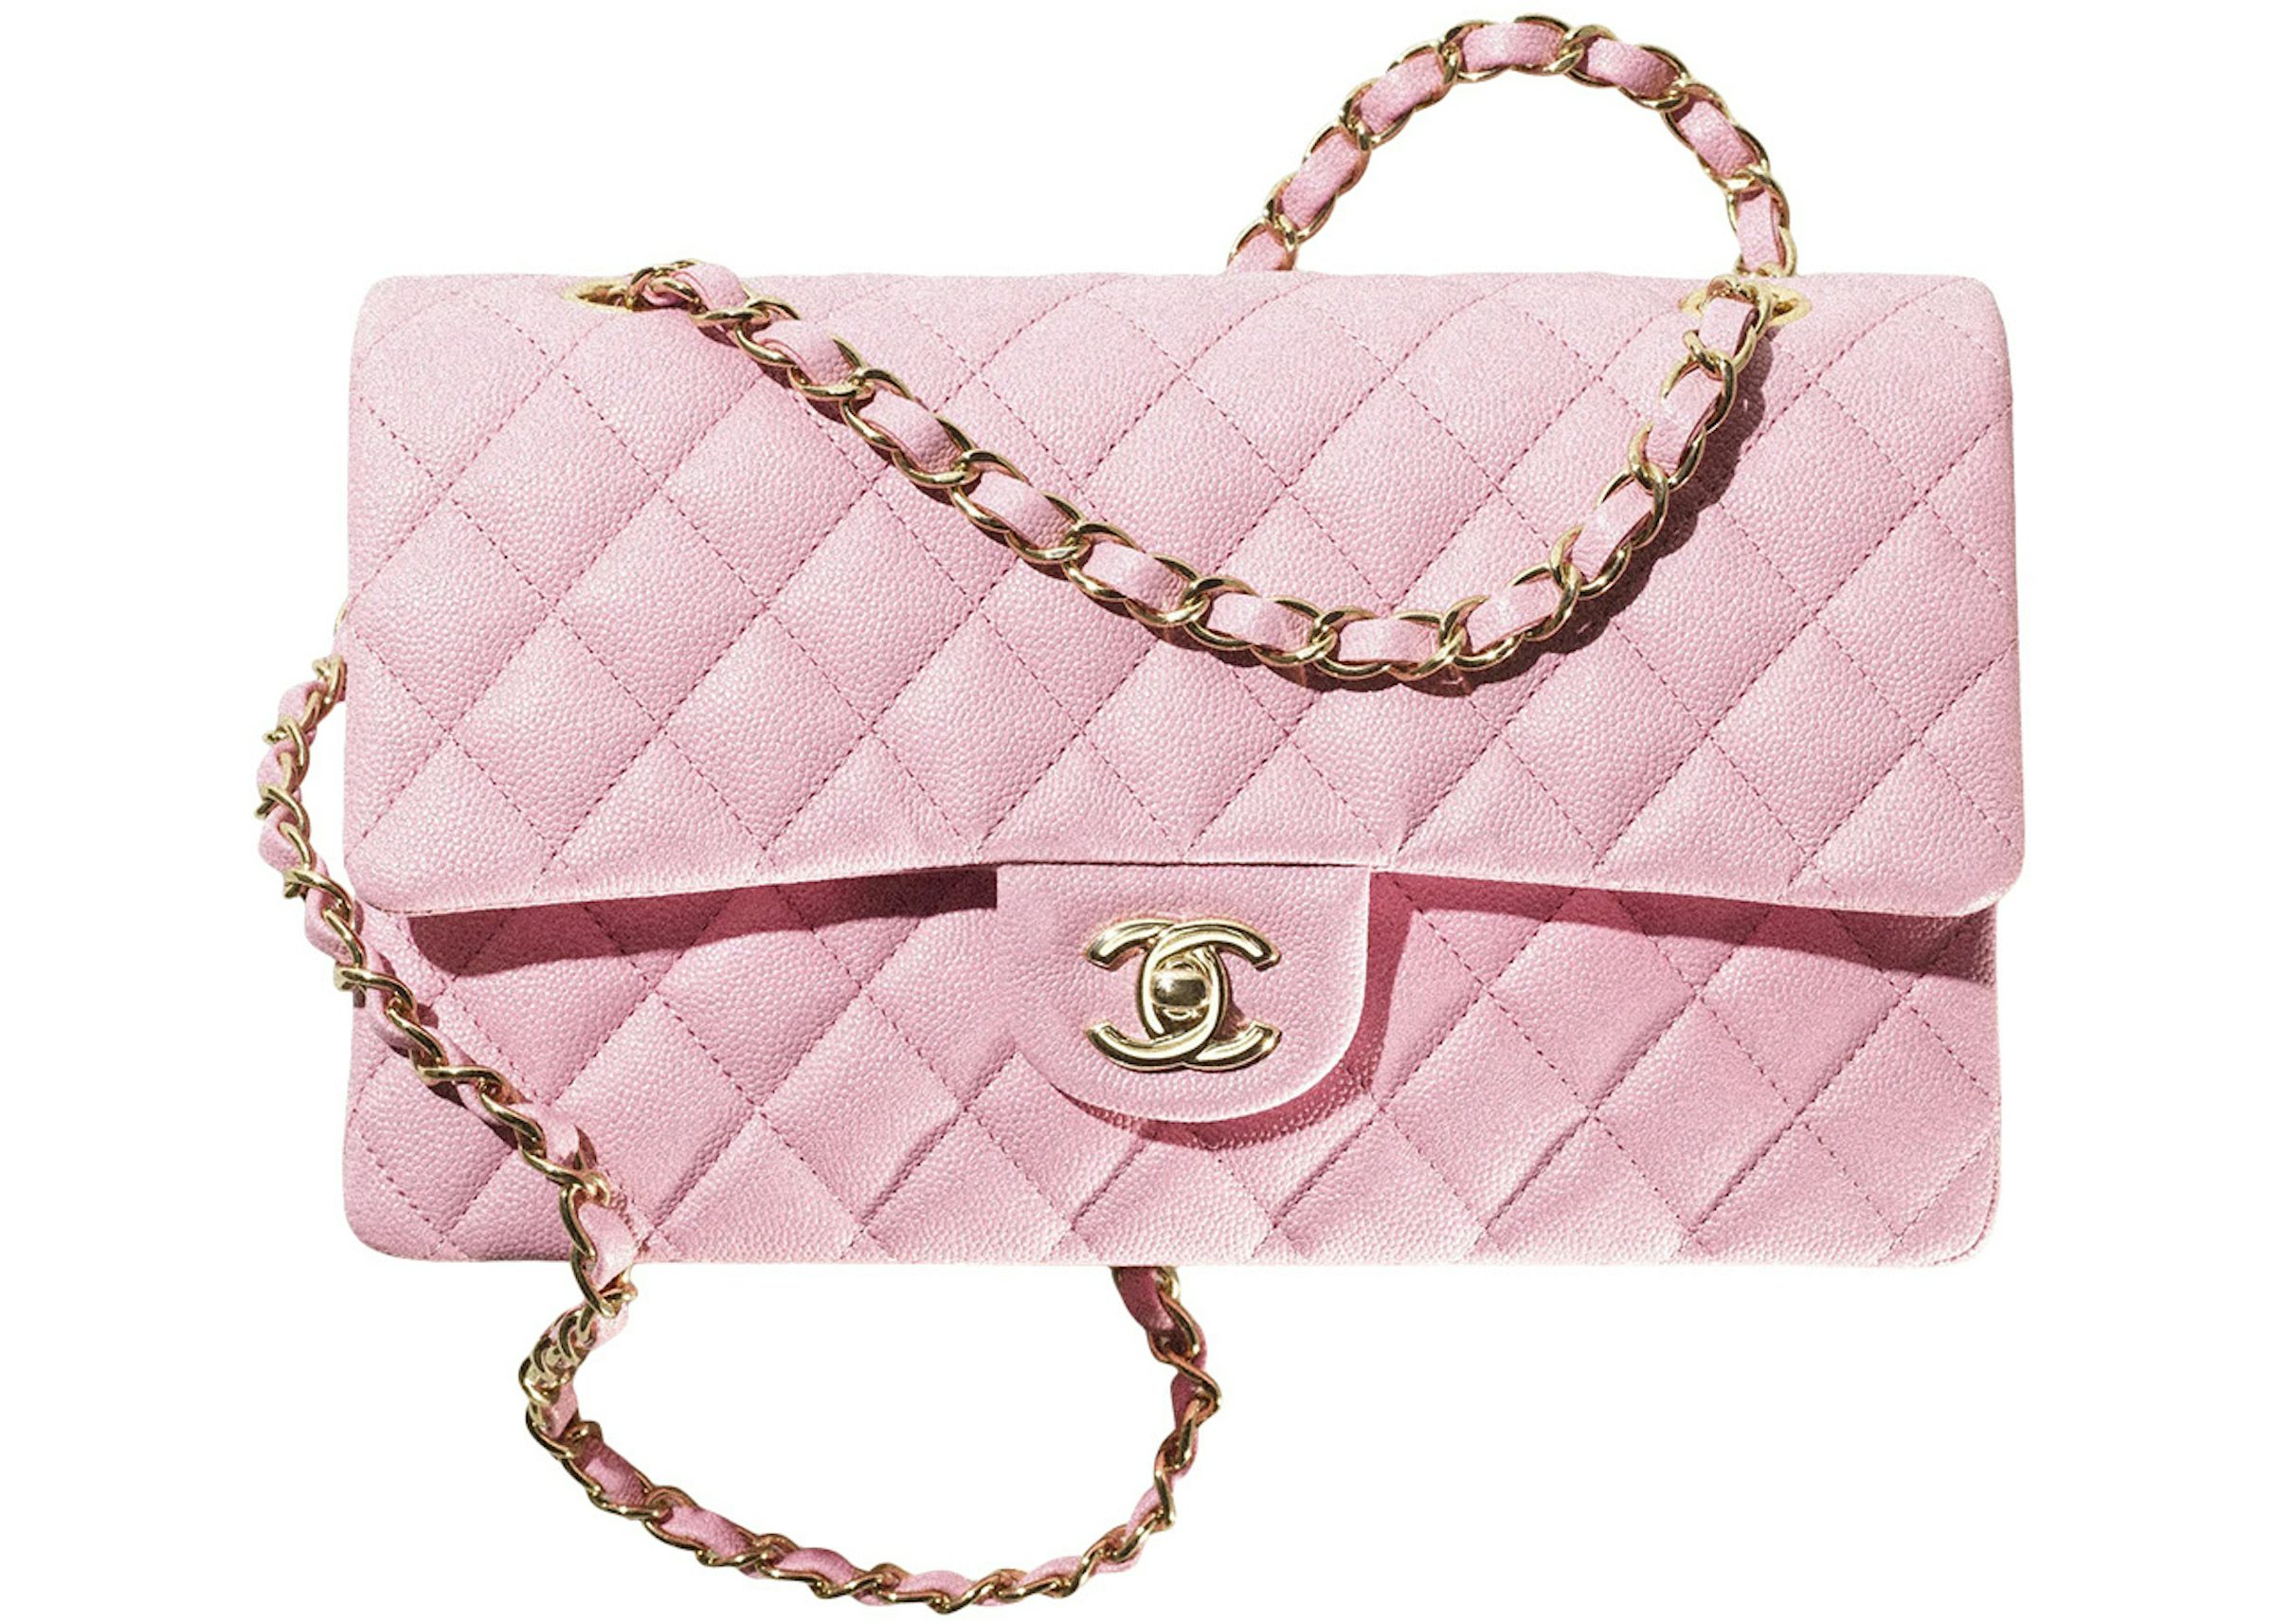 all pink chanel bag